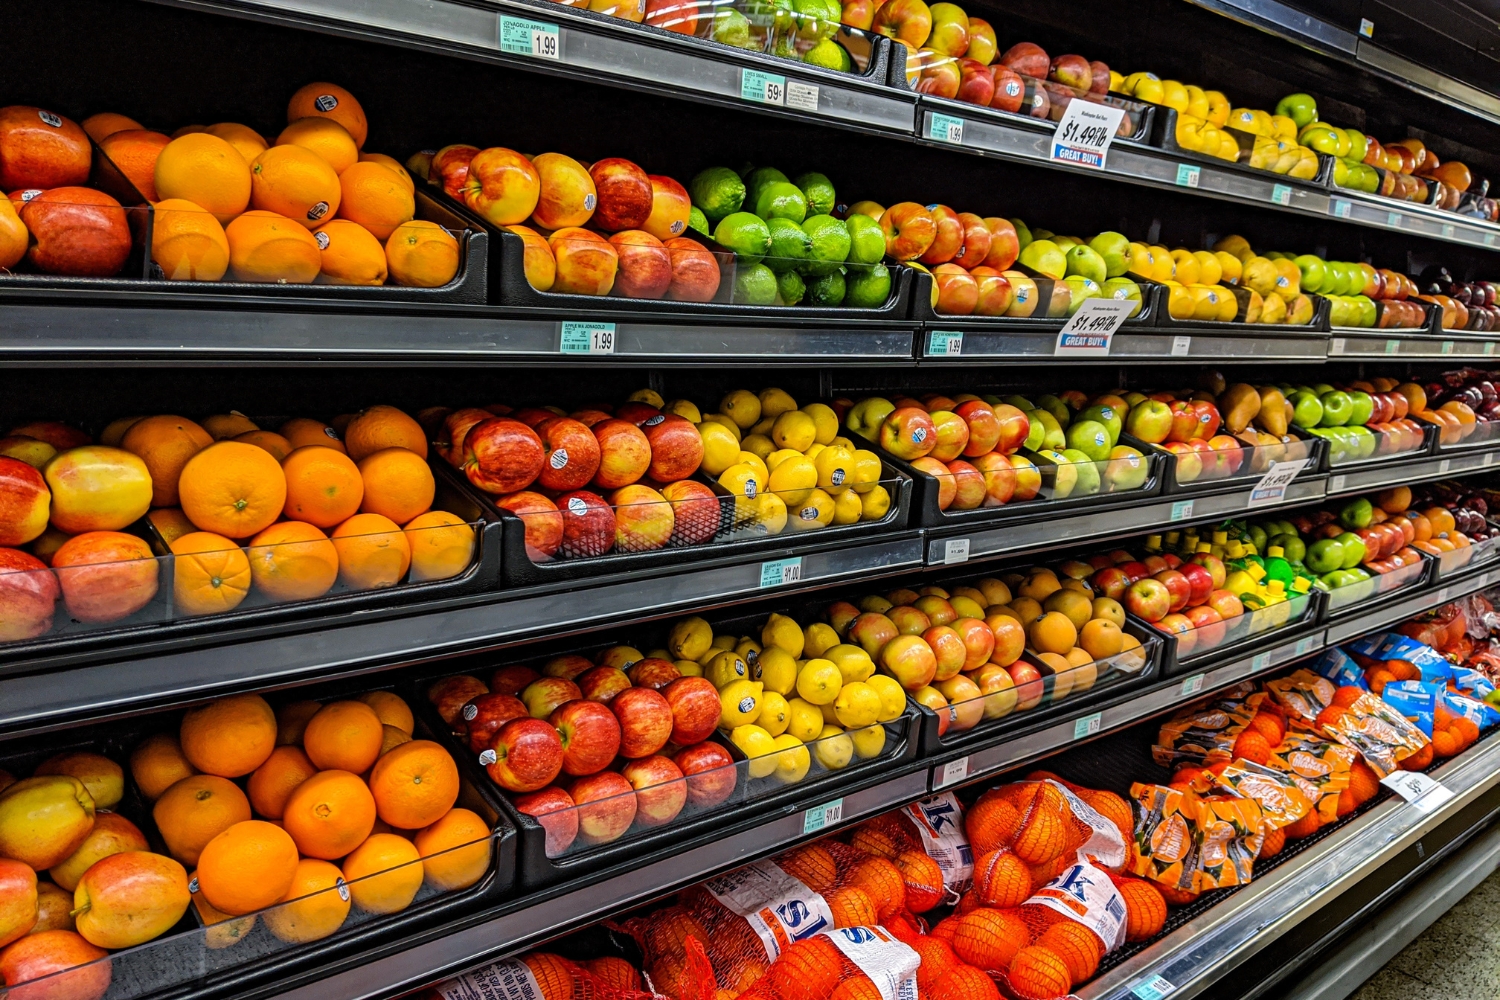 Image of a produce department at a grocery store - Gemma S for Unsplash